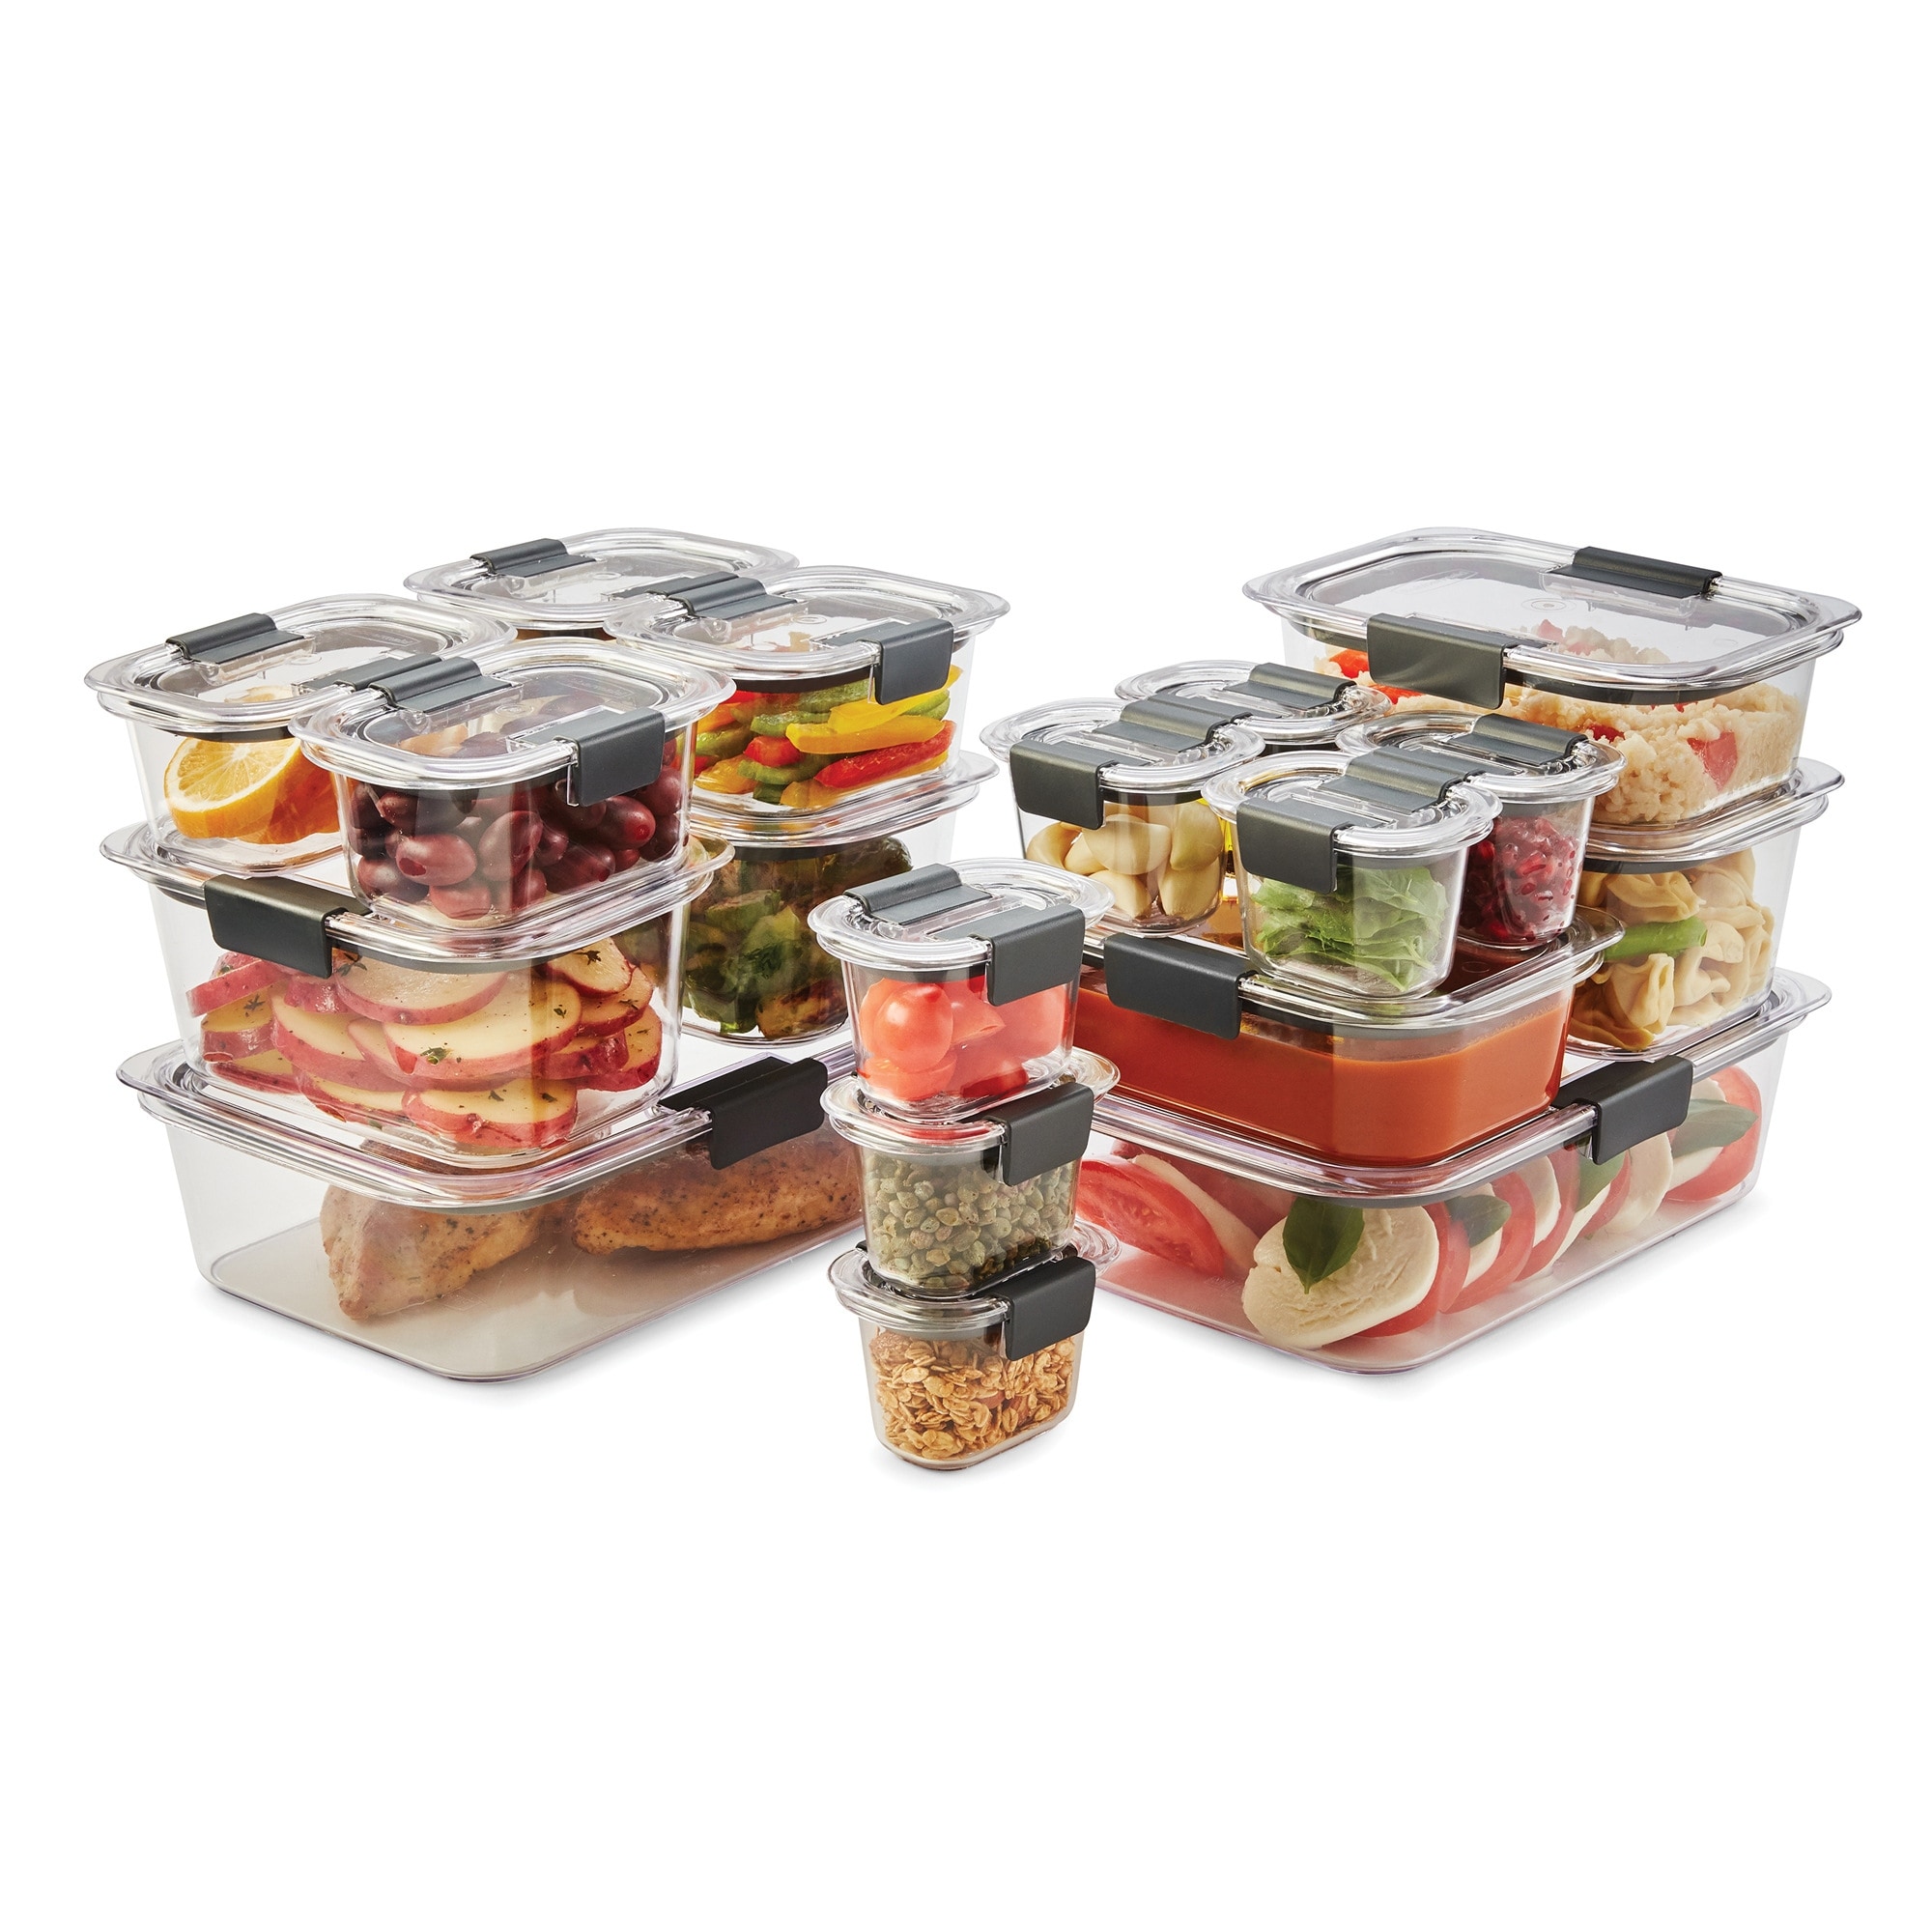 Rubbermaid Brilliance BPA Free Food Storage Containers with Lids, Airtight,  Stain Resistant, Dishwasher Safe, Set of 4 (Large),Grey